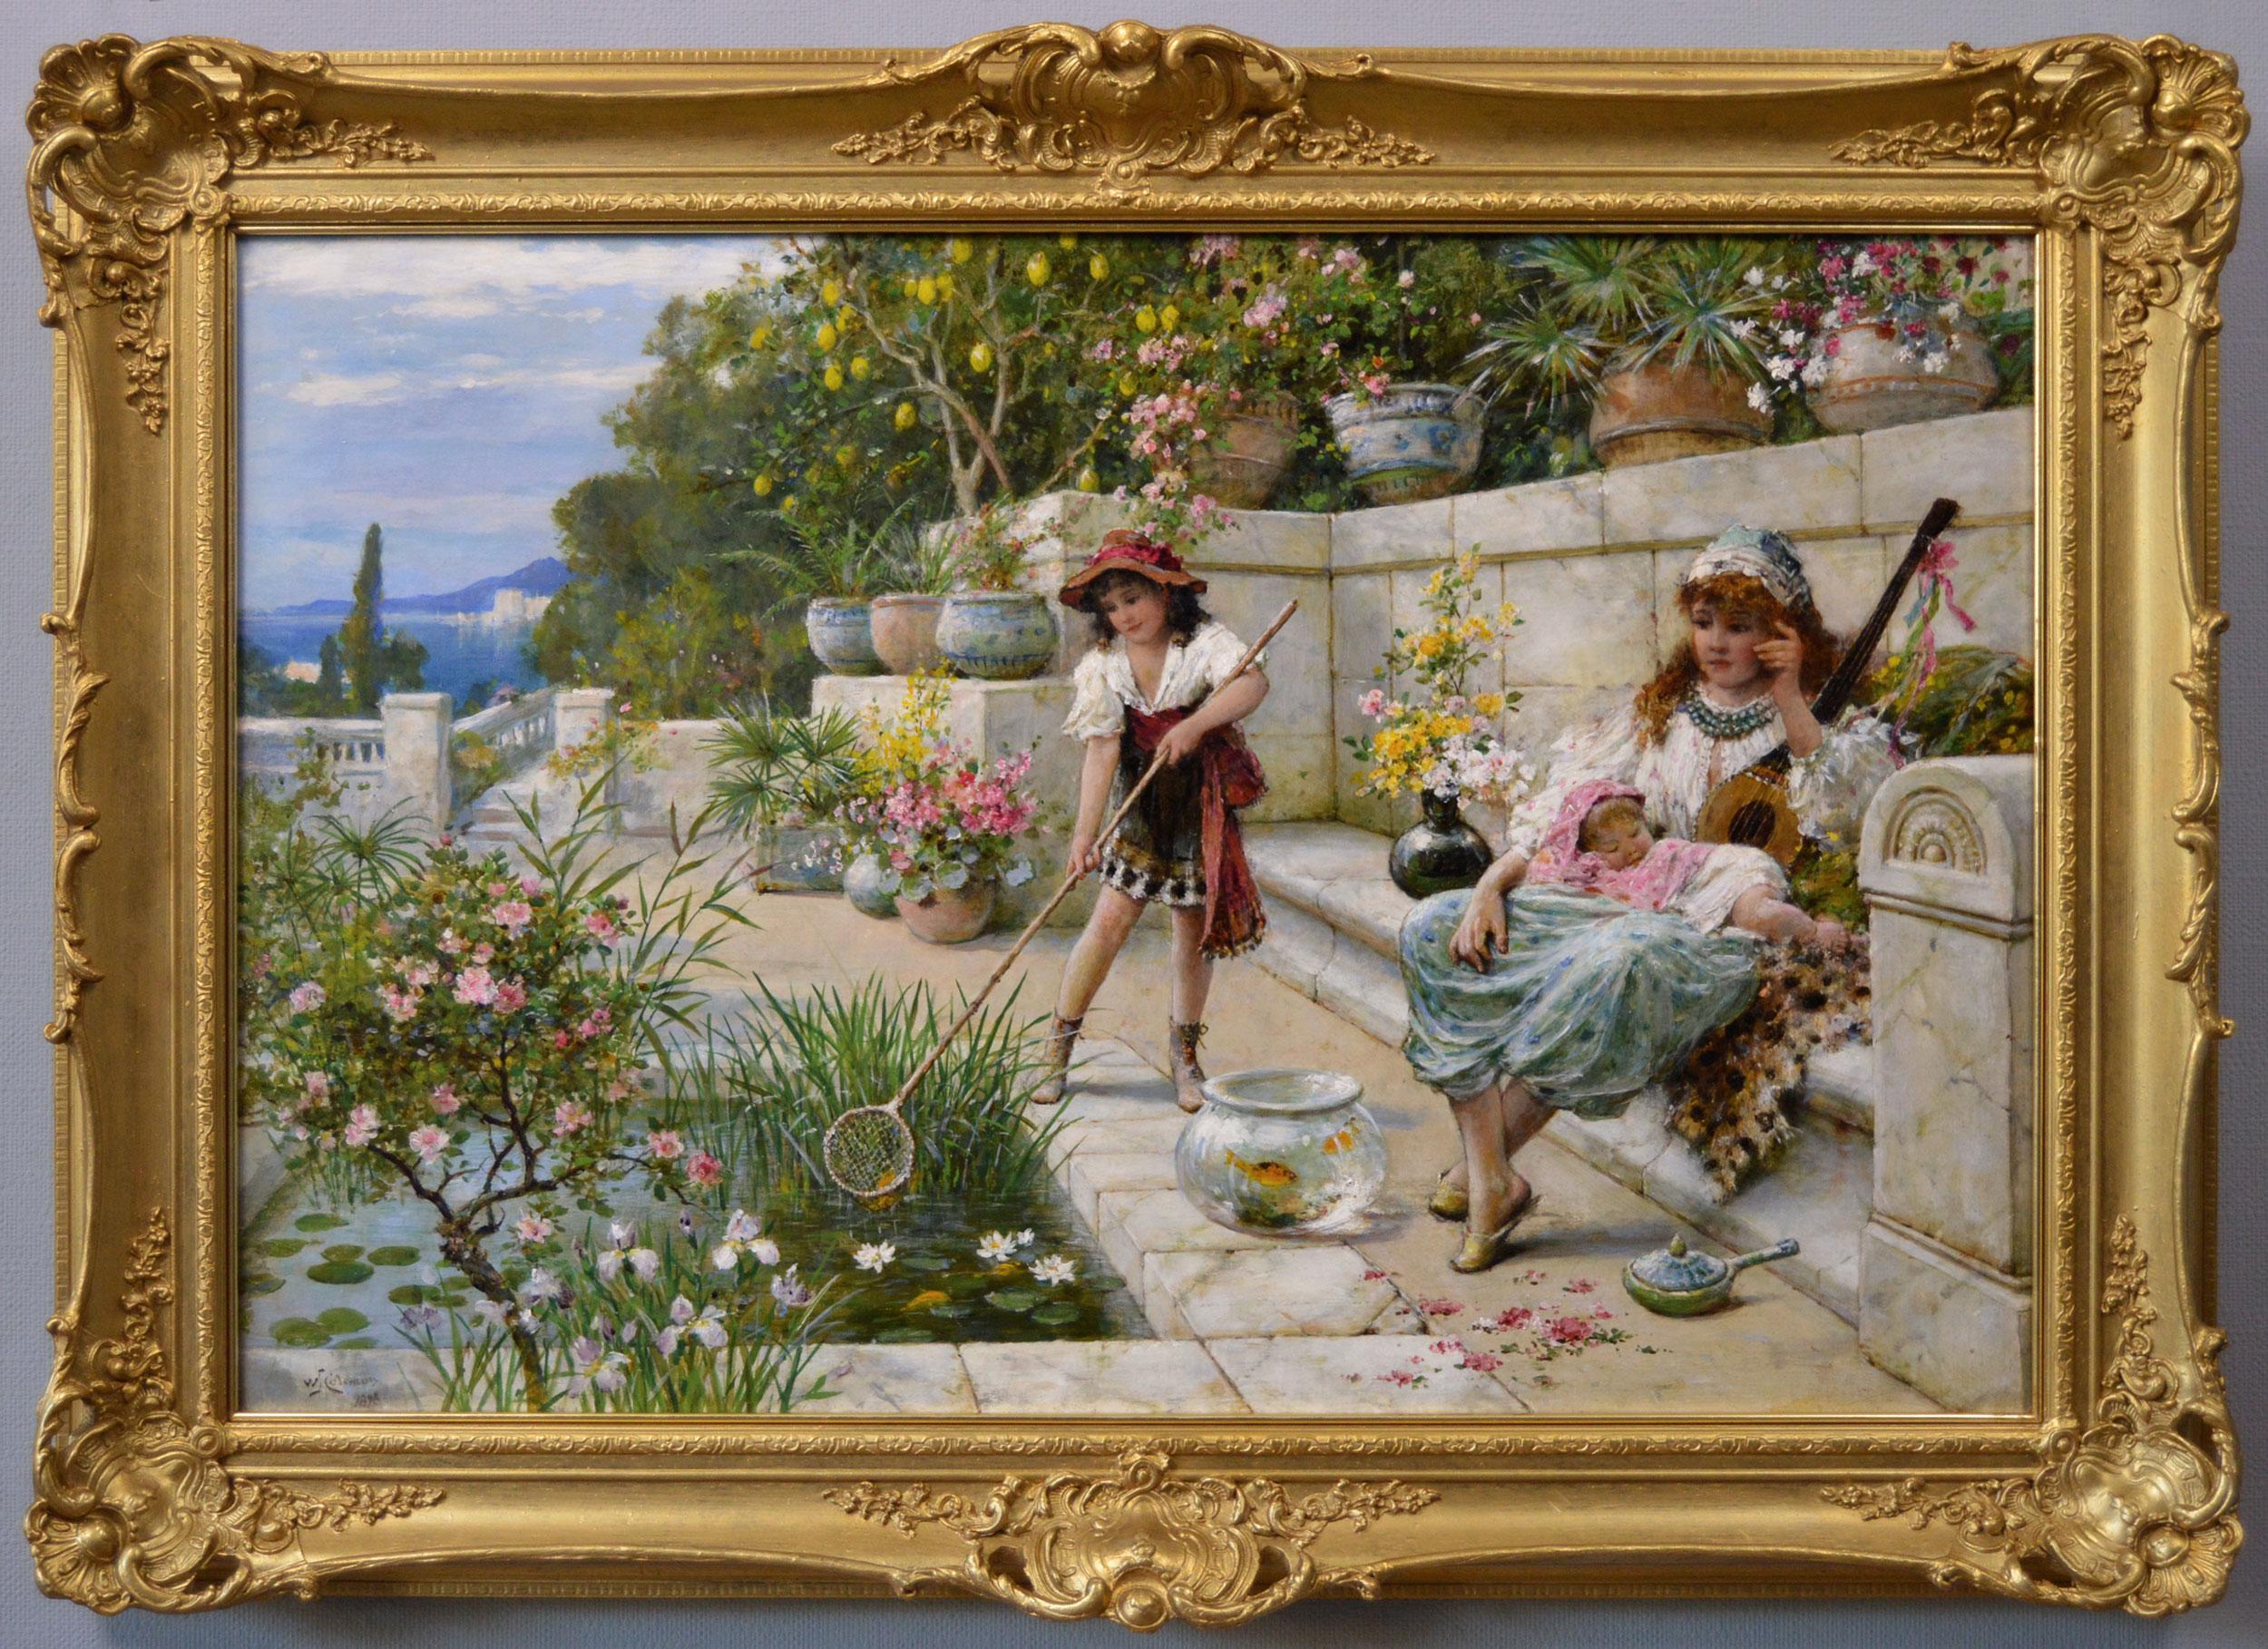 19th Century genre oil painting of a woman in a garden with two girls